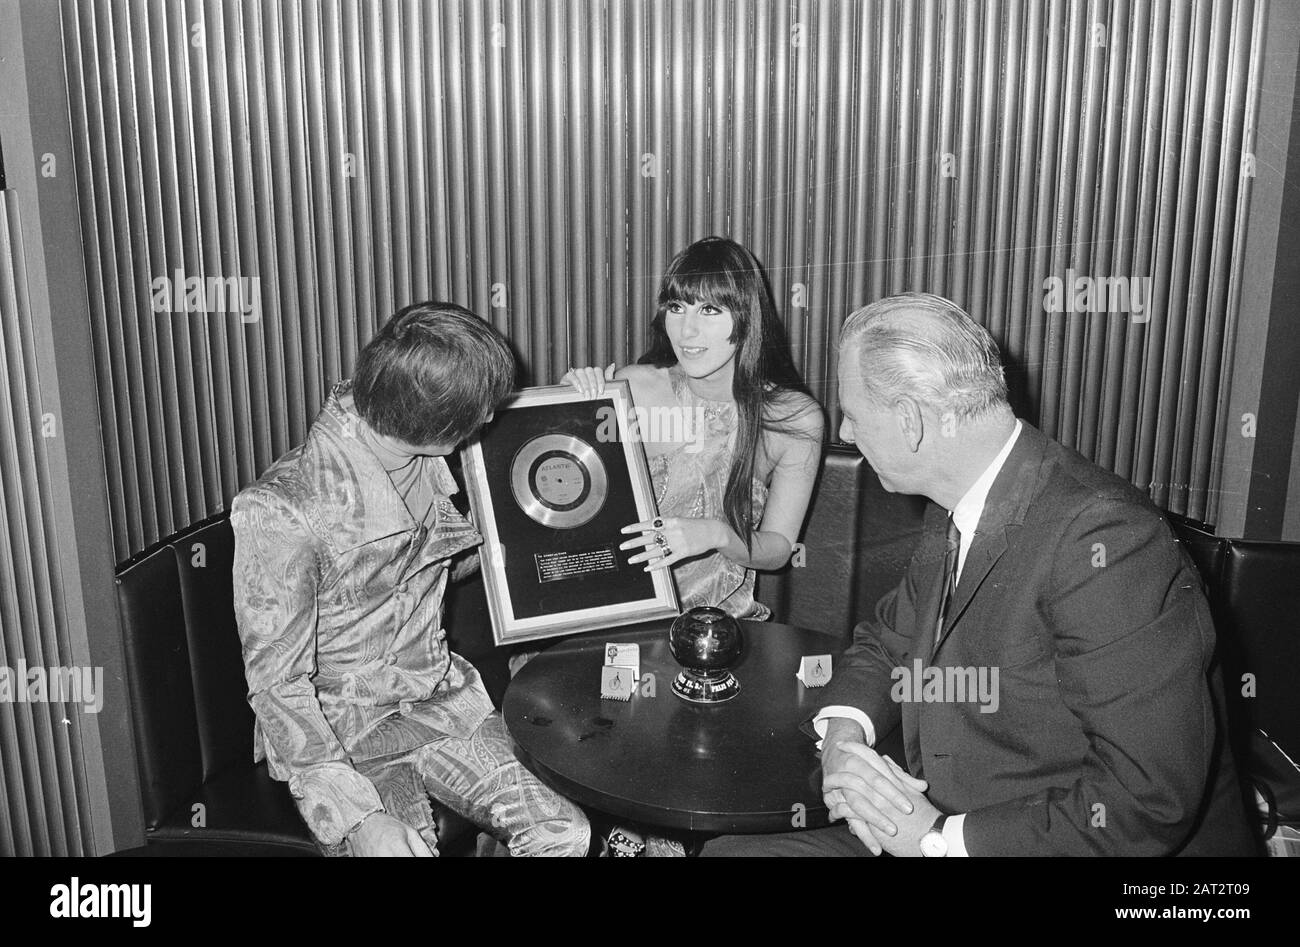 Golden Plate for Sonny and Cher Date: February 4, 1967 Keywords: music, pop groups, prizes, singers Personal name: Bono, Sonny, Cher Stock Photo